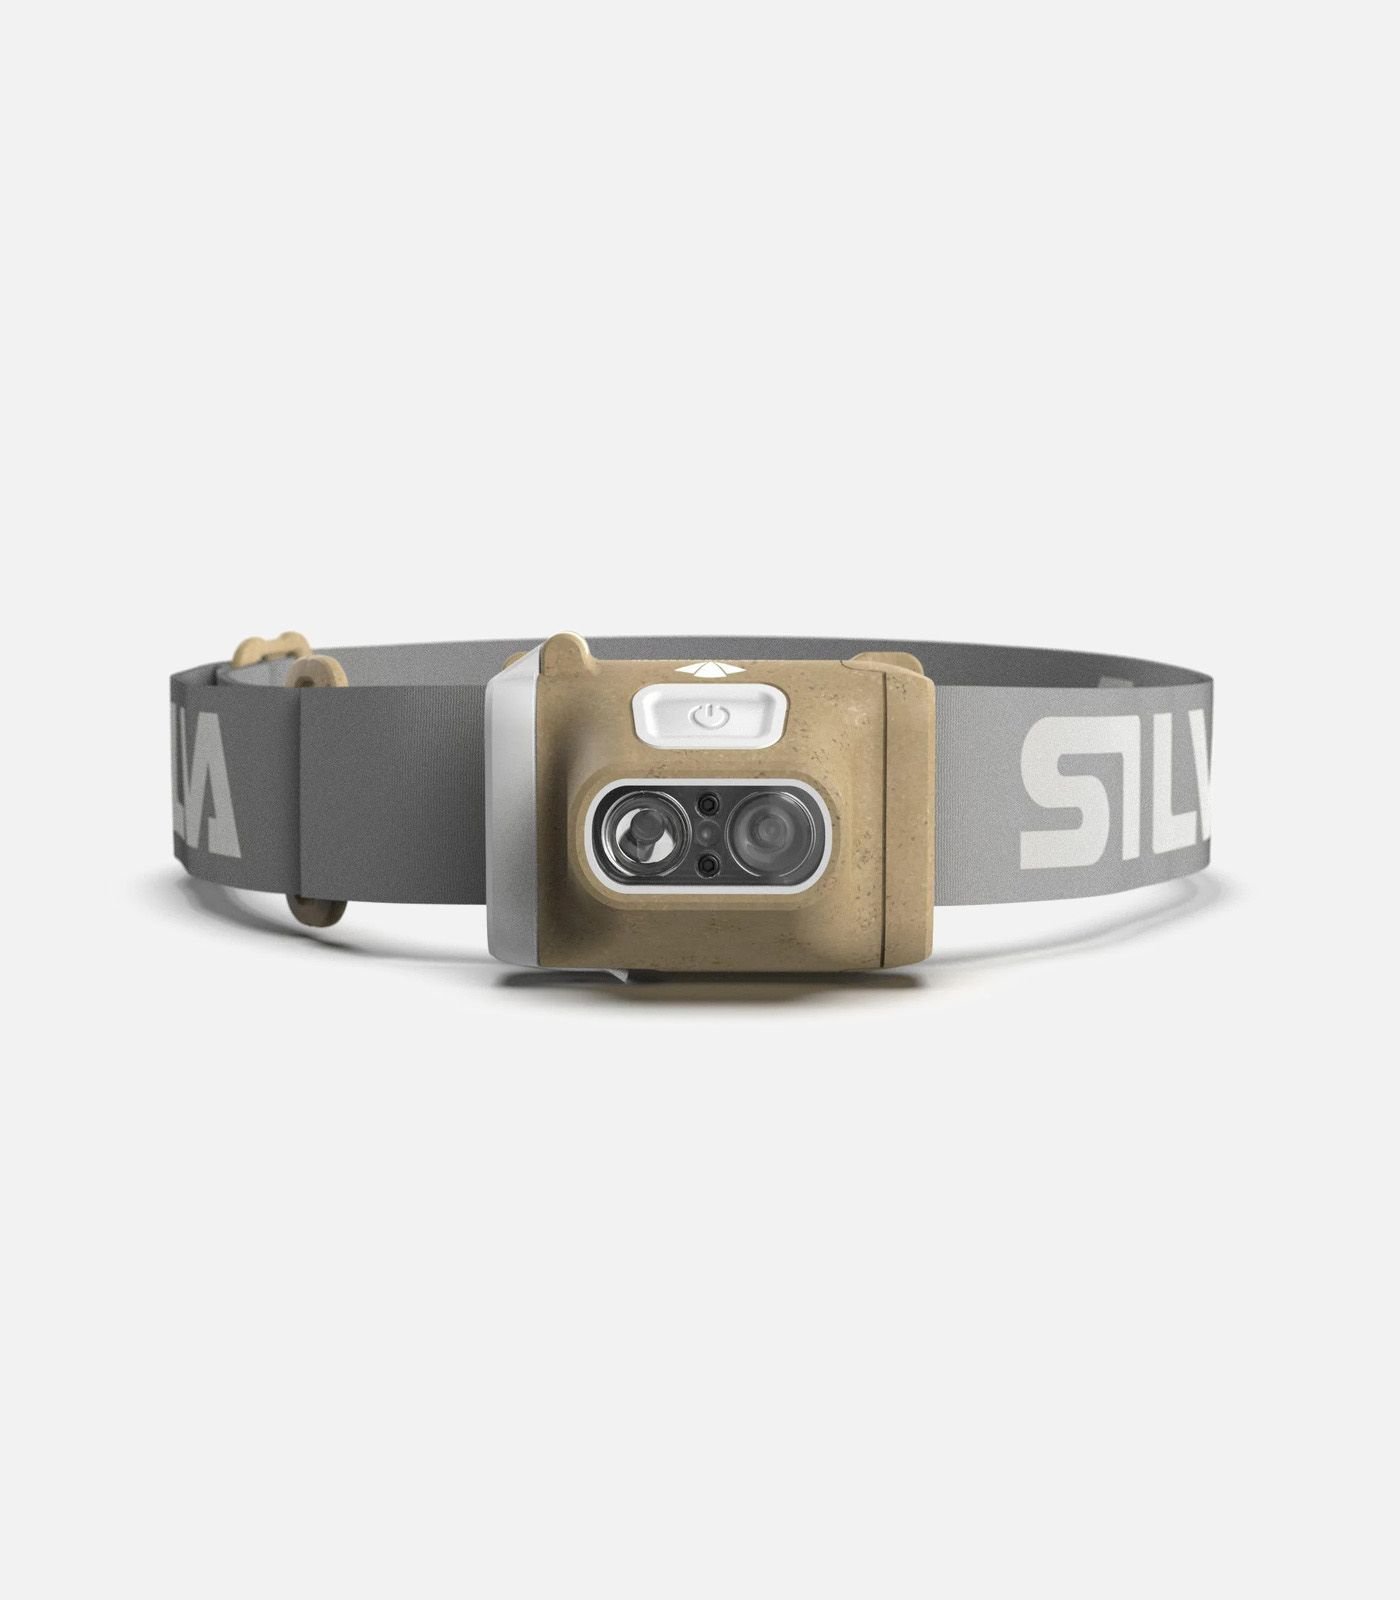 SILVA rechargeable headlamp for hiking and trekking